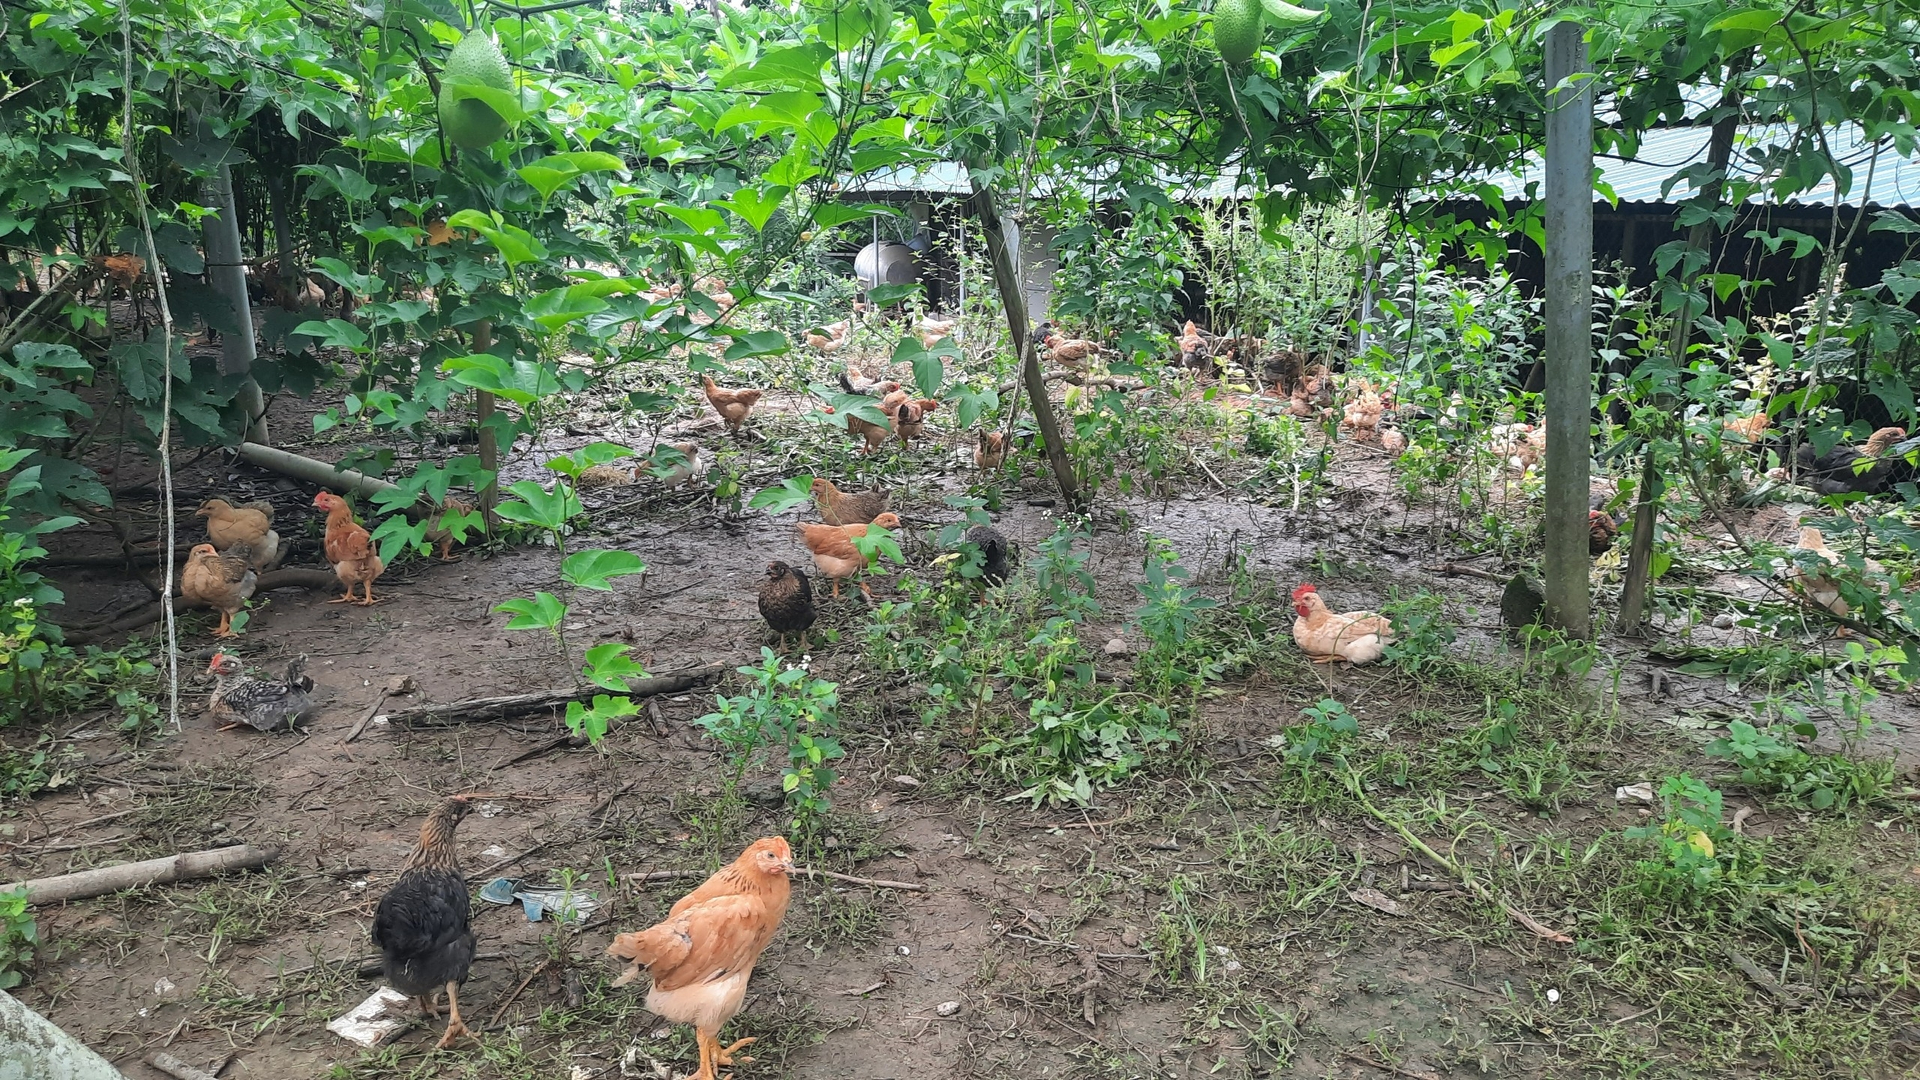 Tien Yen chickens eat medicinal plants and herbs in the garden. Photo: Nguyen Thanh.